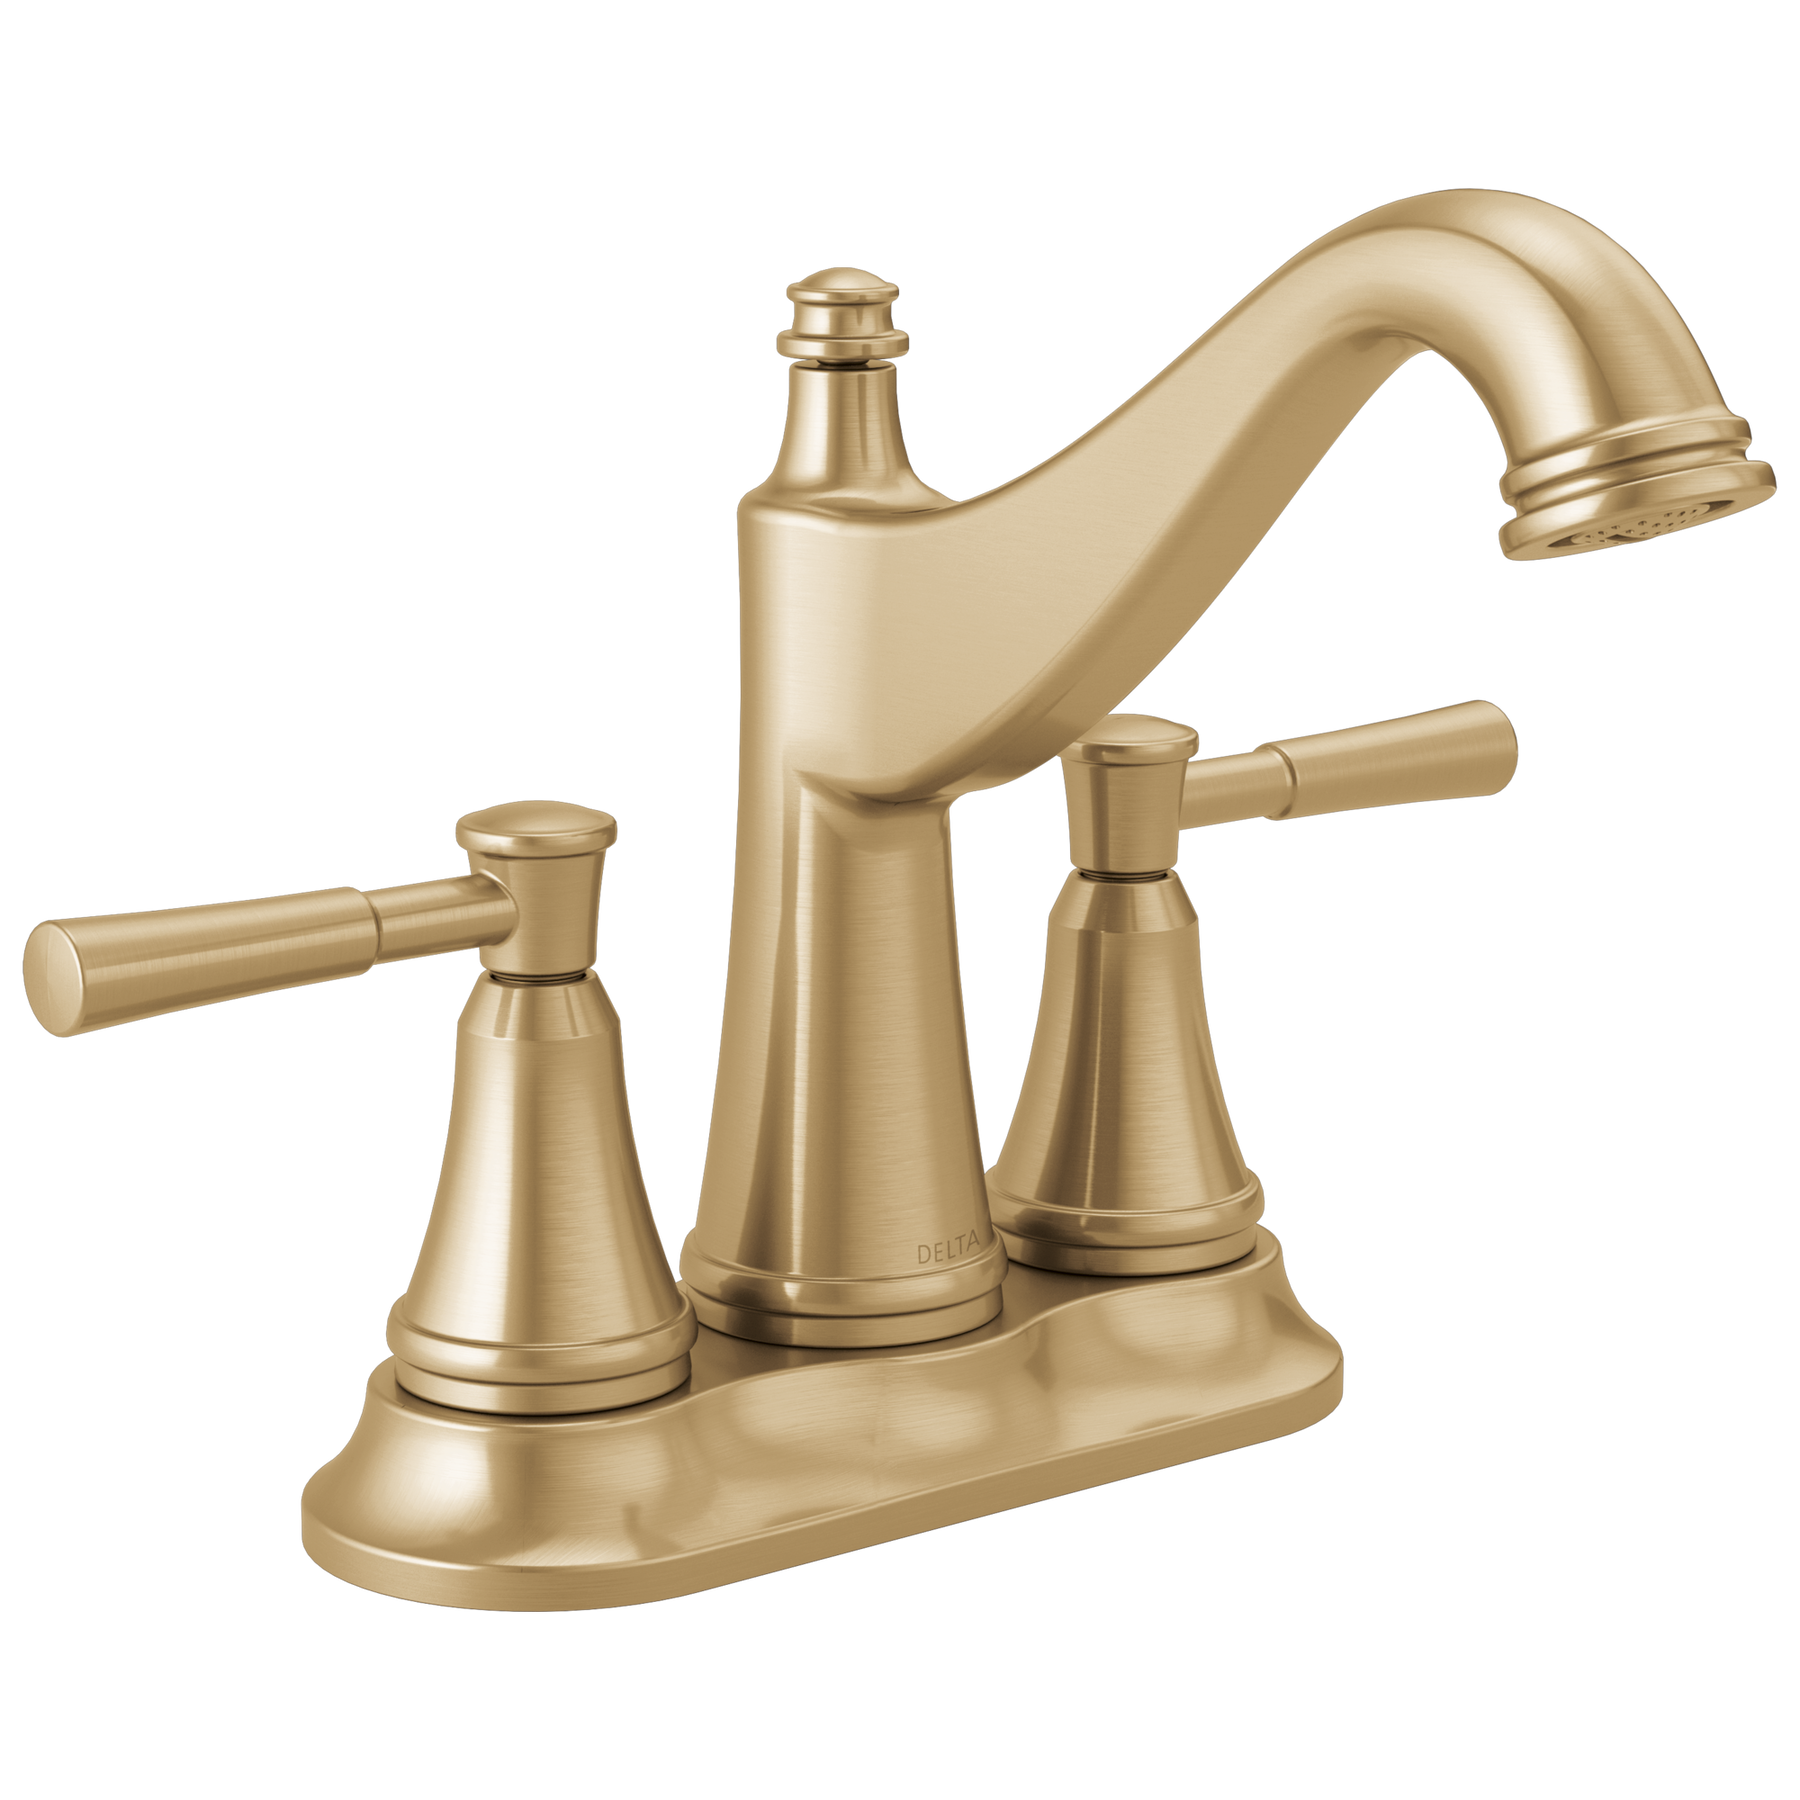 Two Handle Centerset Bathroom Faucet in Champagne Bronze 25798LF-CZ